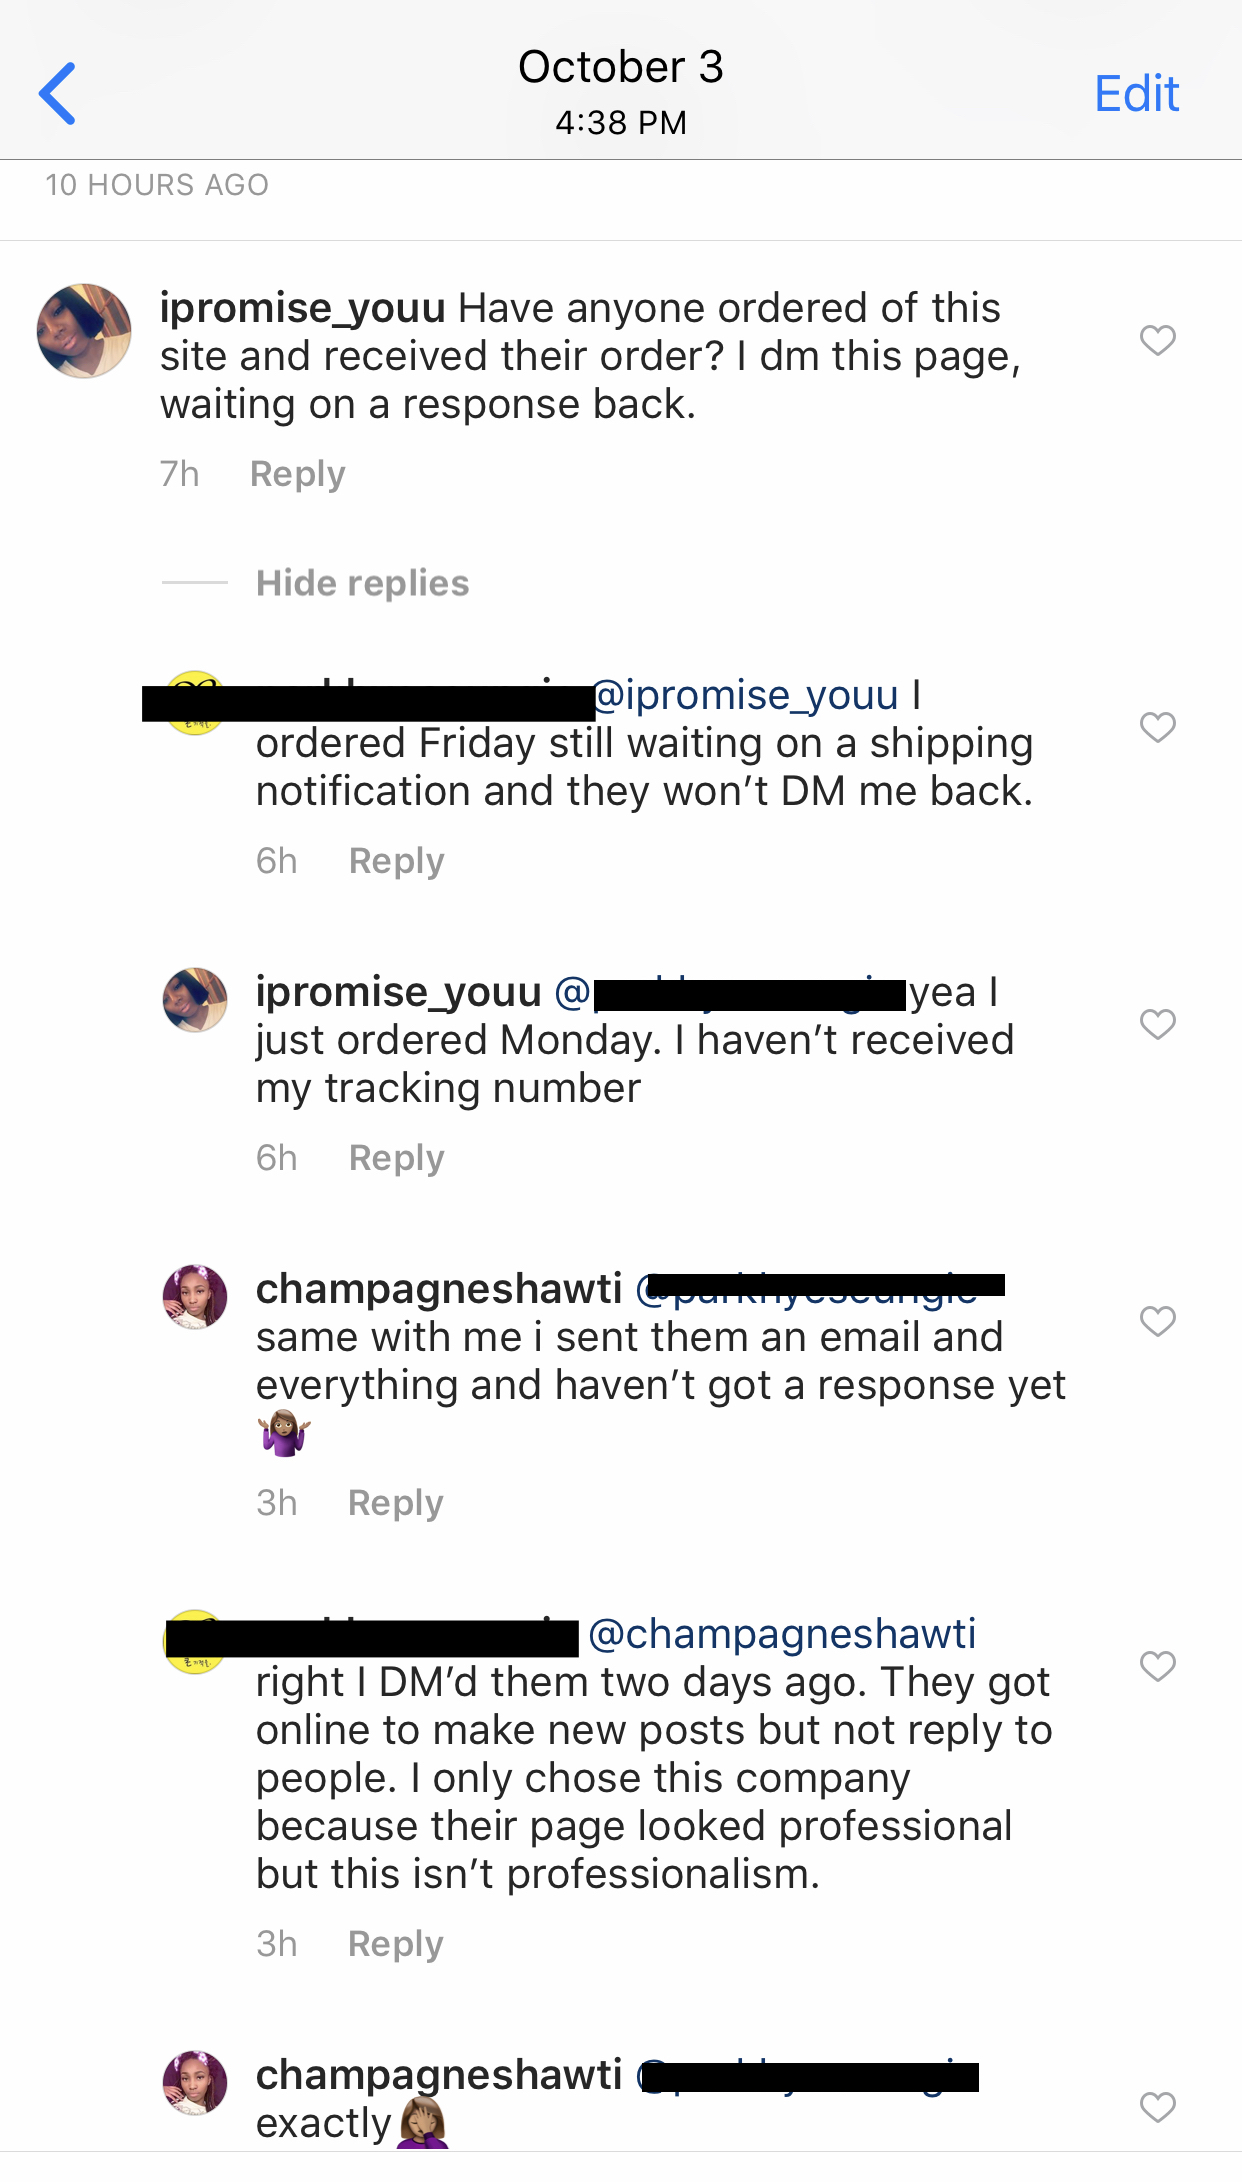 Other late orders (They deleted our comments)